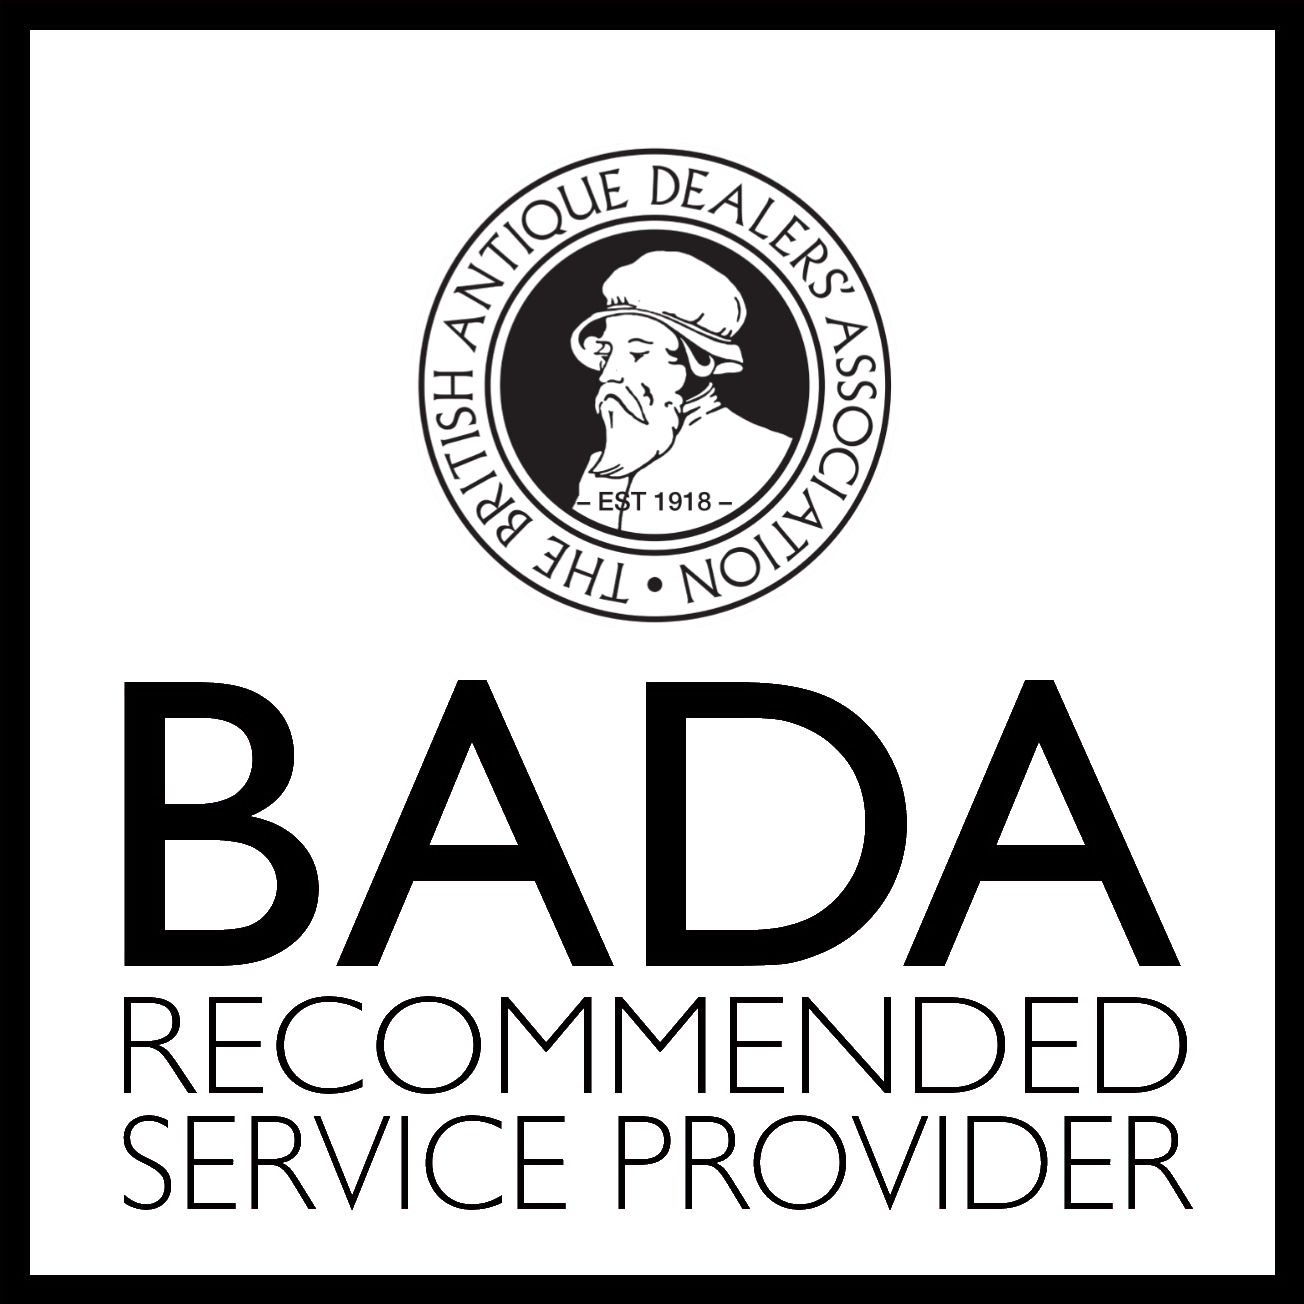 BADA recommended service provider